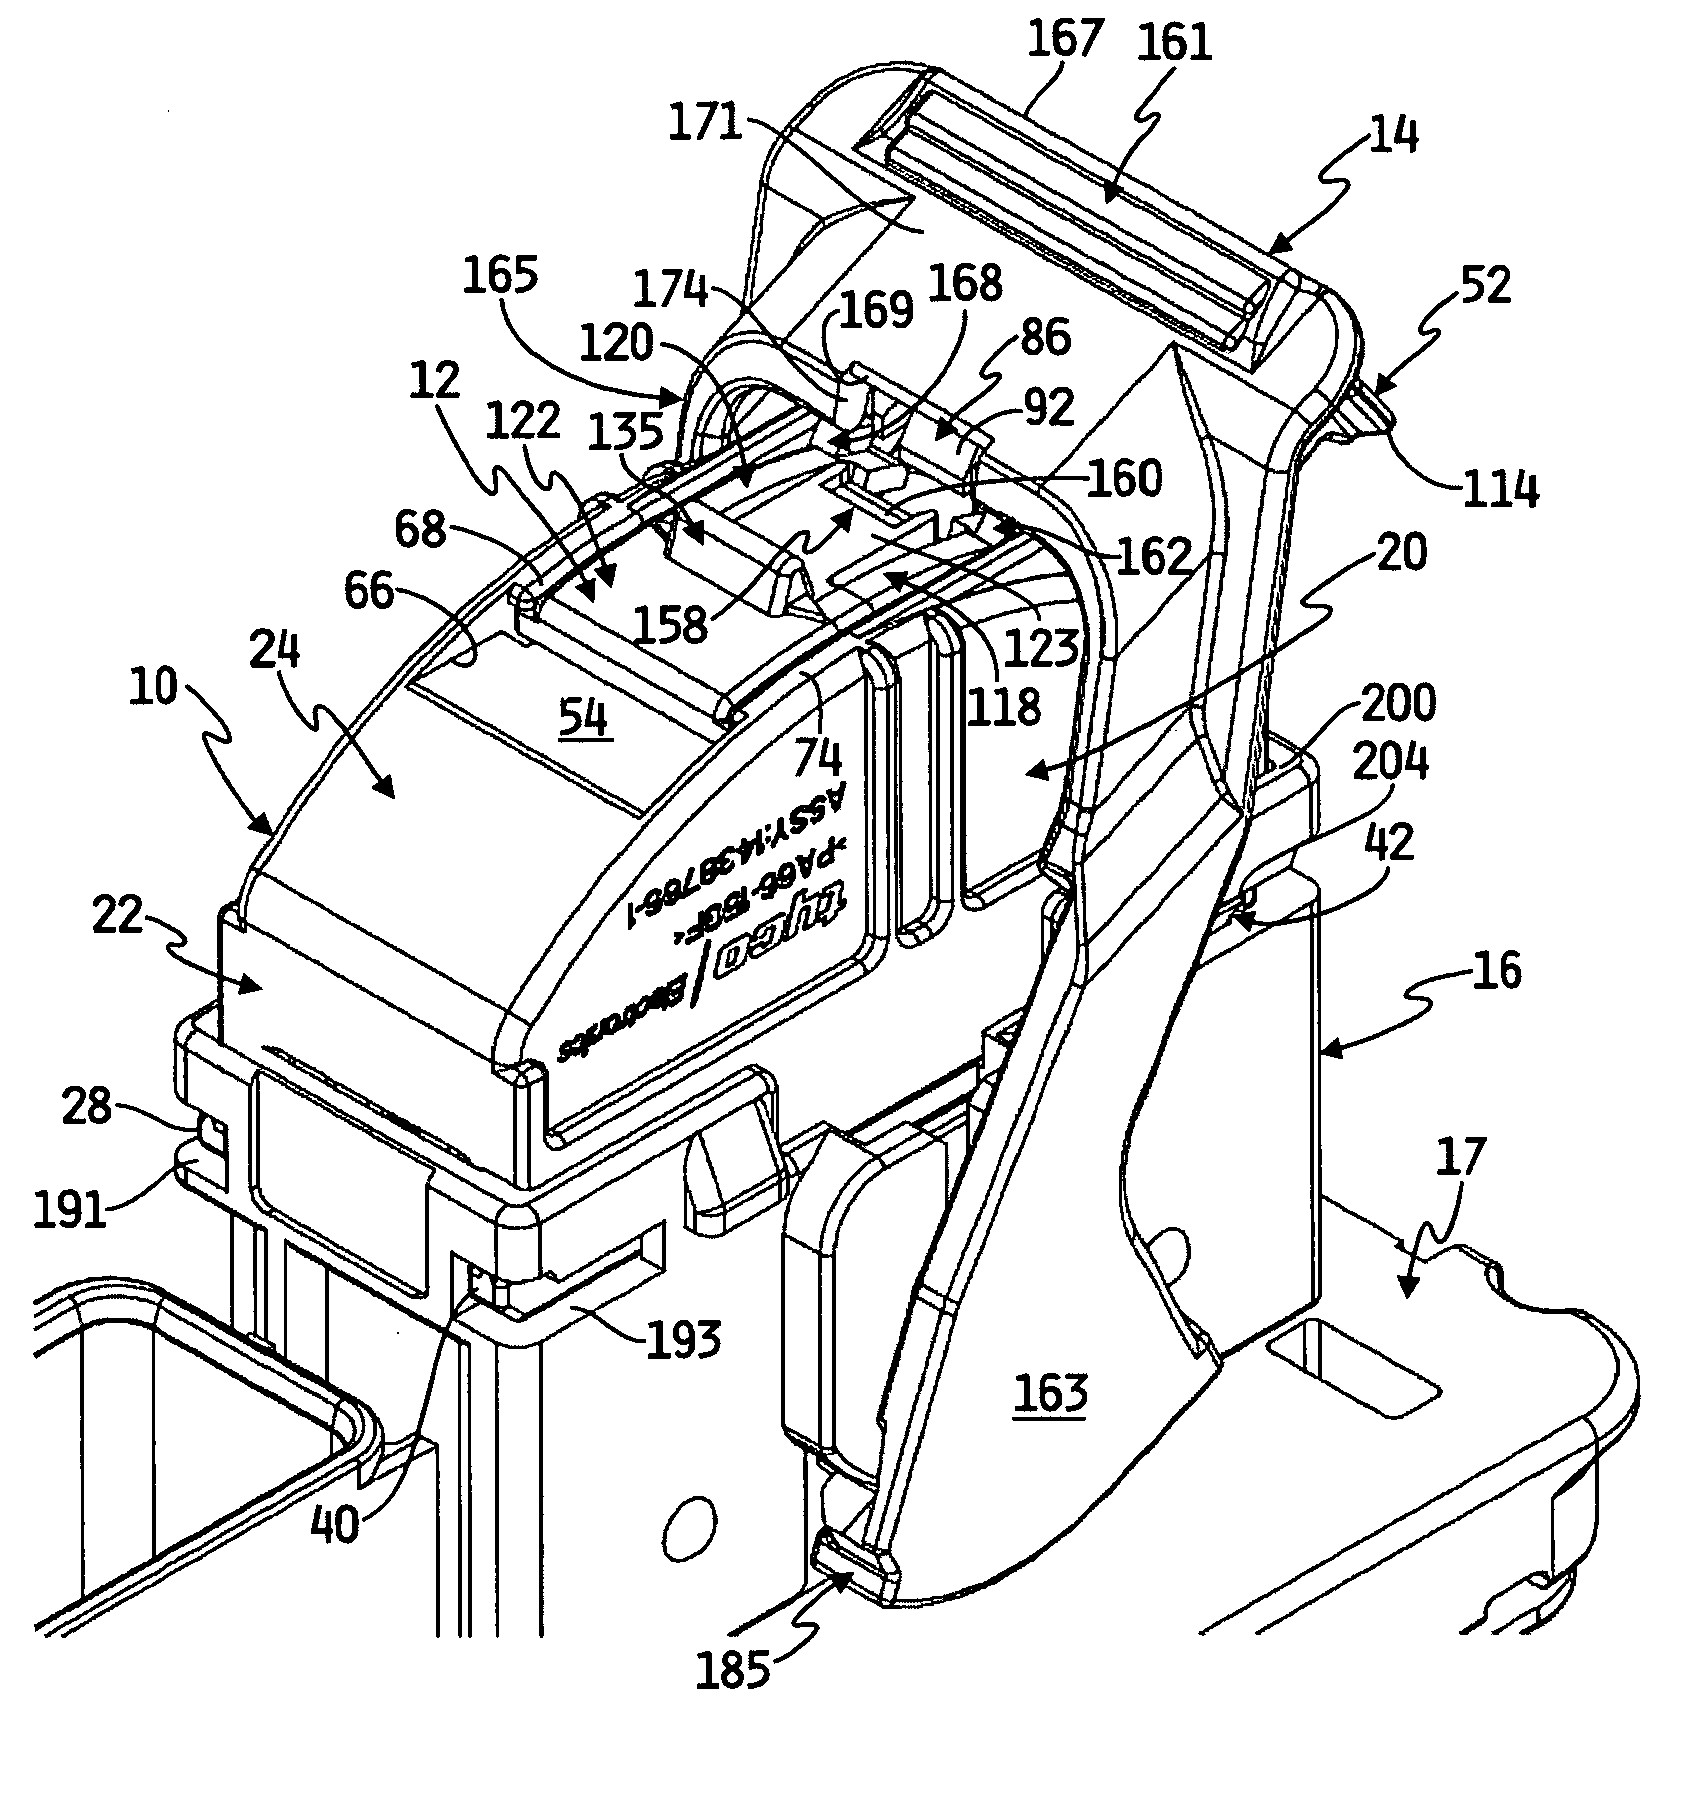 Lever mated connector assembly with a position assurance device